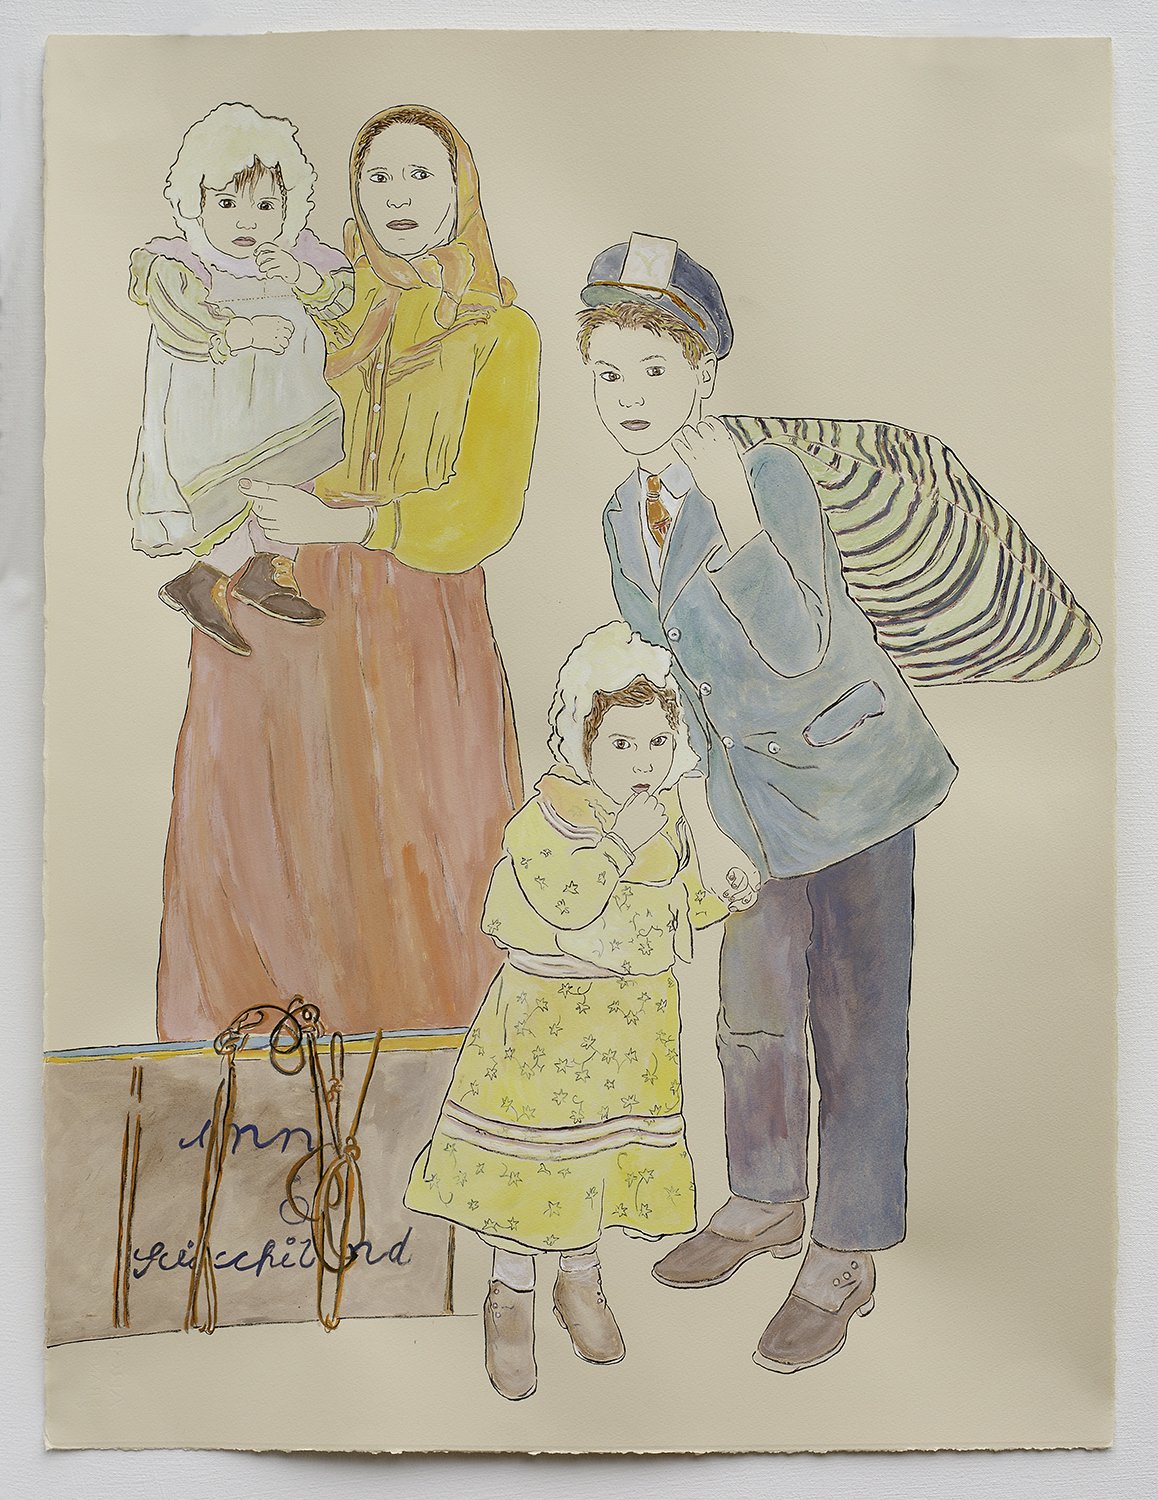   Available    Mother and Children at Ellis Island, Eastern European Immigrants, 1900   30” x 22”, gouache, watercolor, India Ink on paper, 2022 